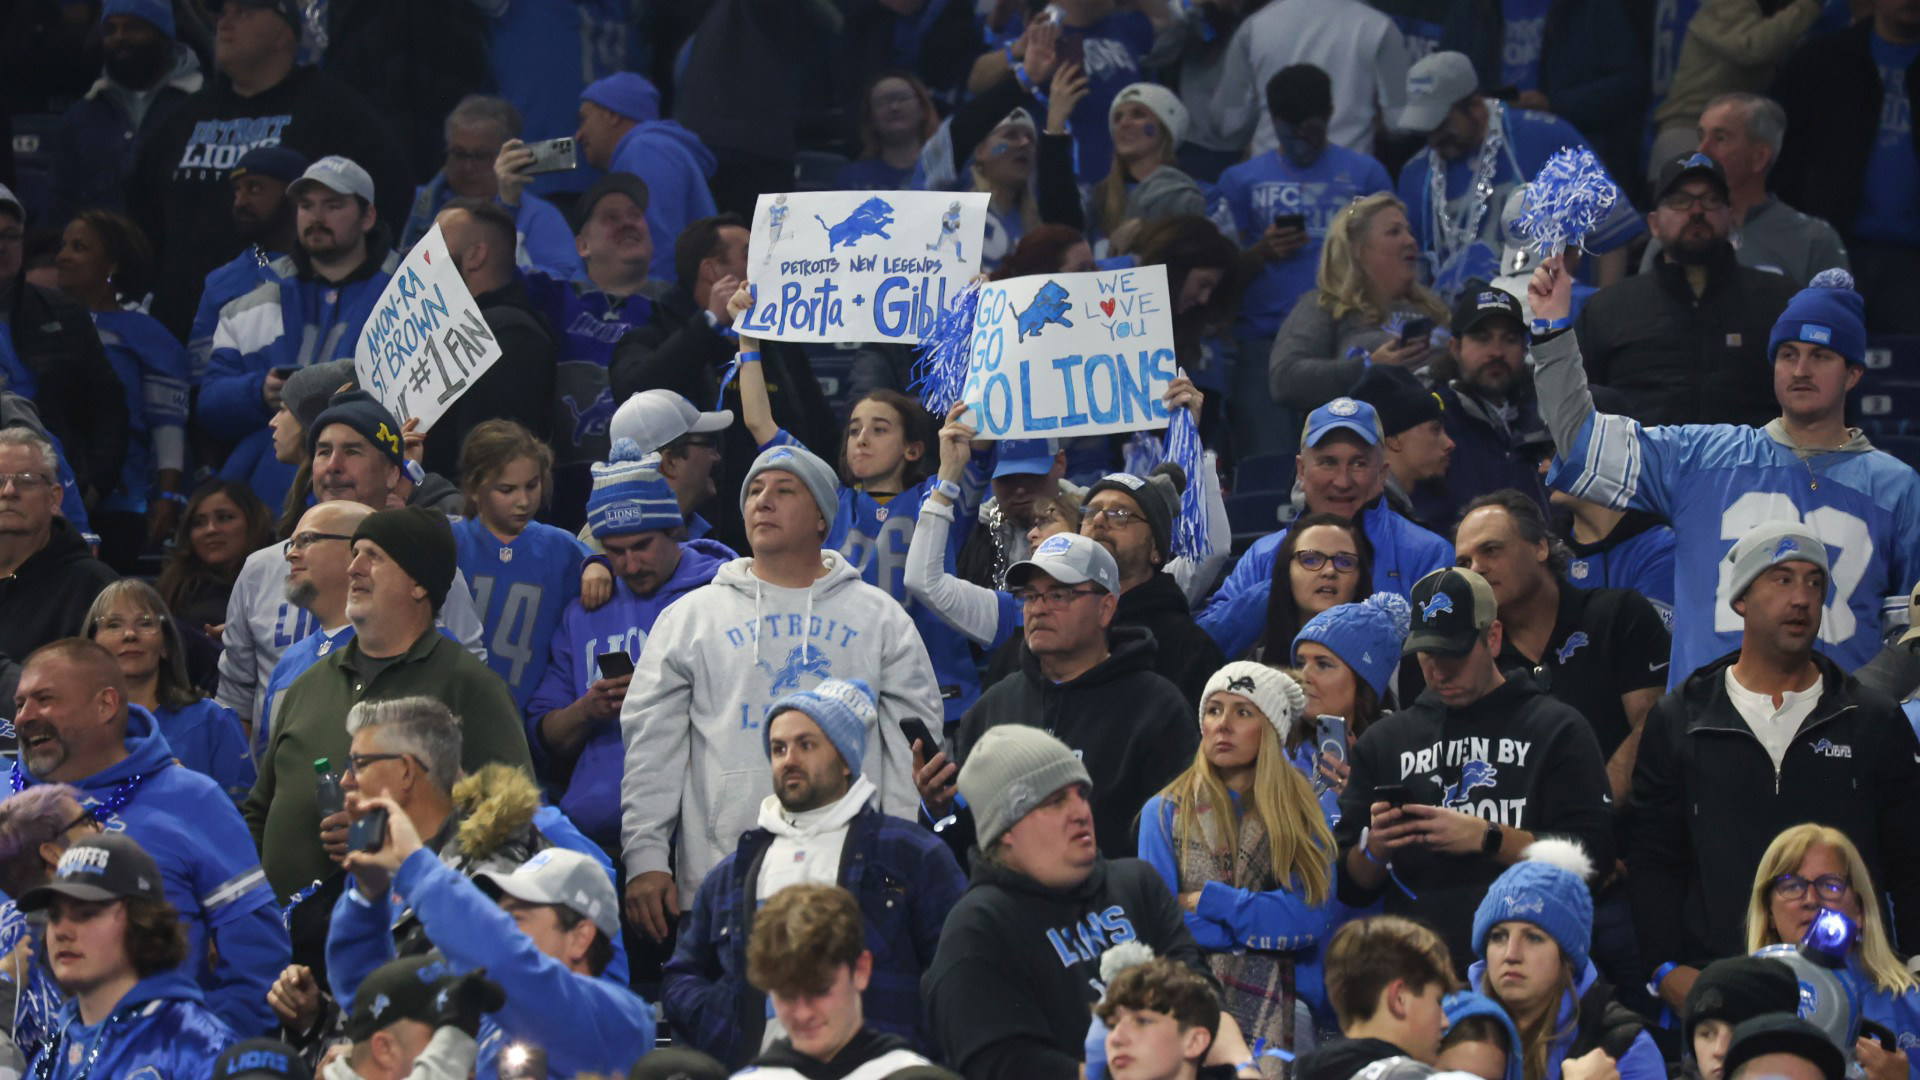 Buccaneers vs. Lions ticket prices hit 17,000 as demand surged for